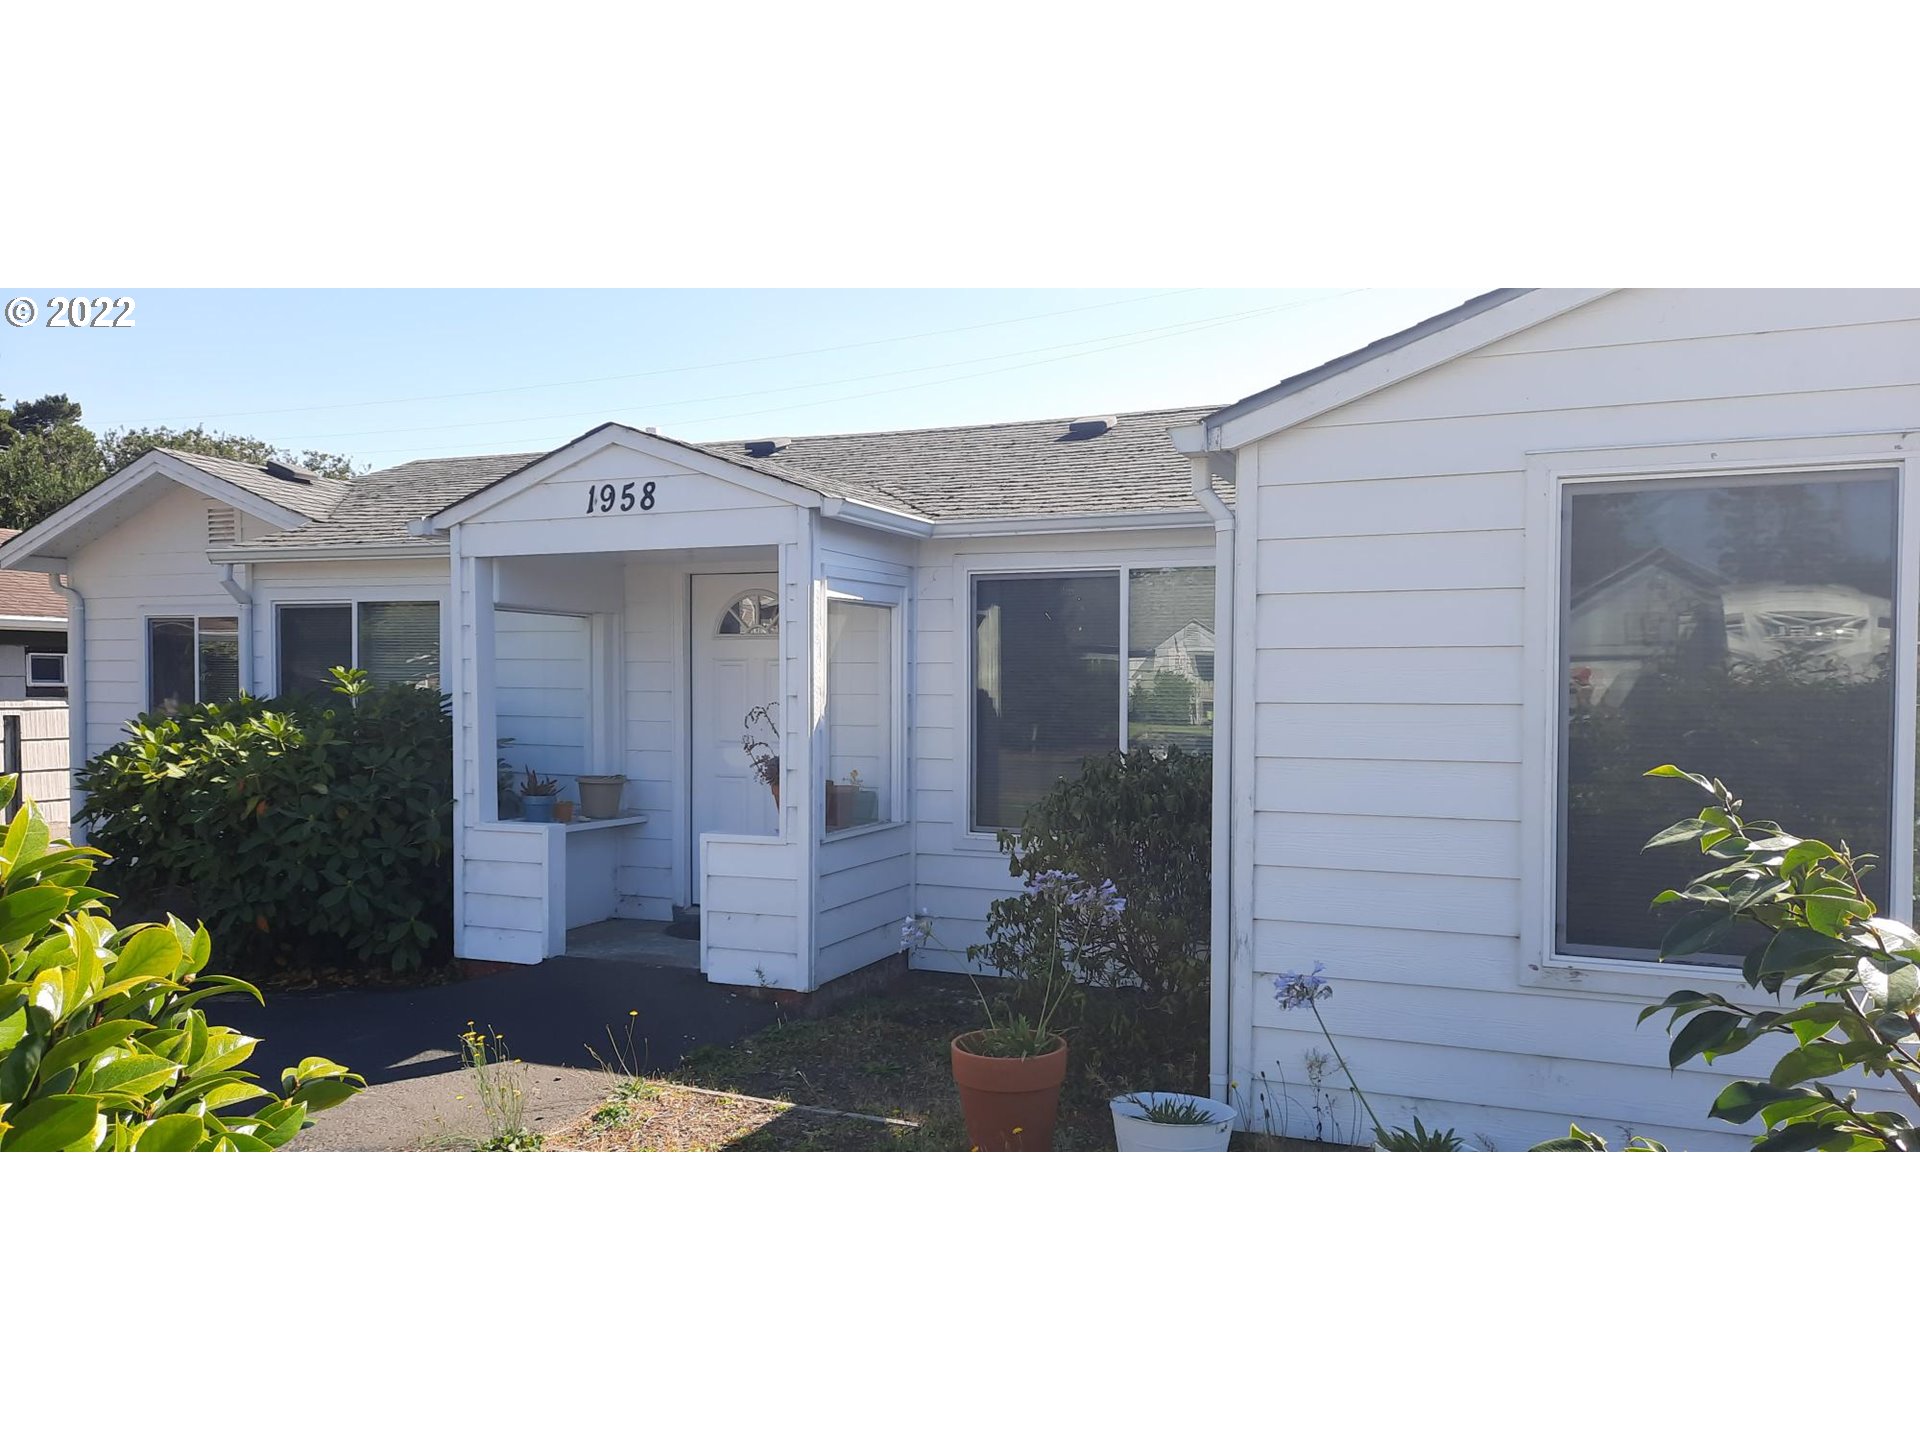 Opportunity awaits. This cottage has the central location to expand your family and work life. Extra parking in the front and back for RVs, boats, etc. Clean home ready for your dreams.